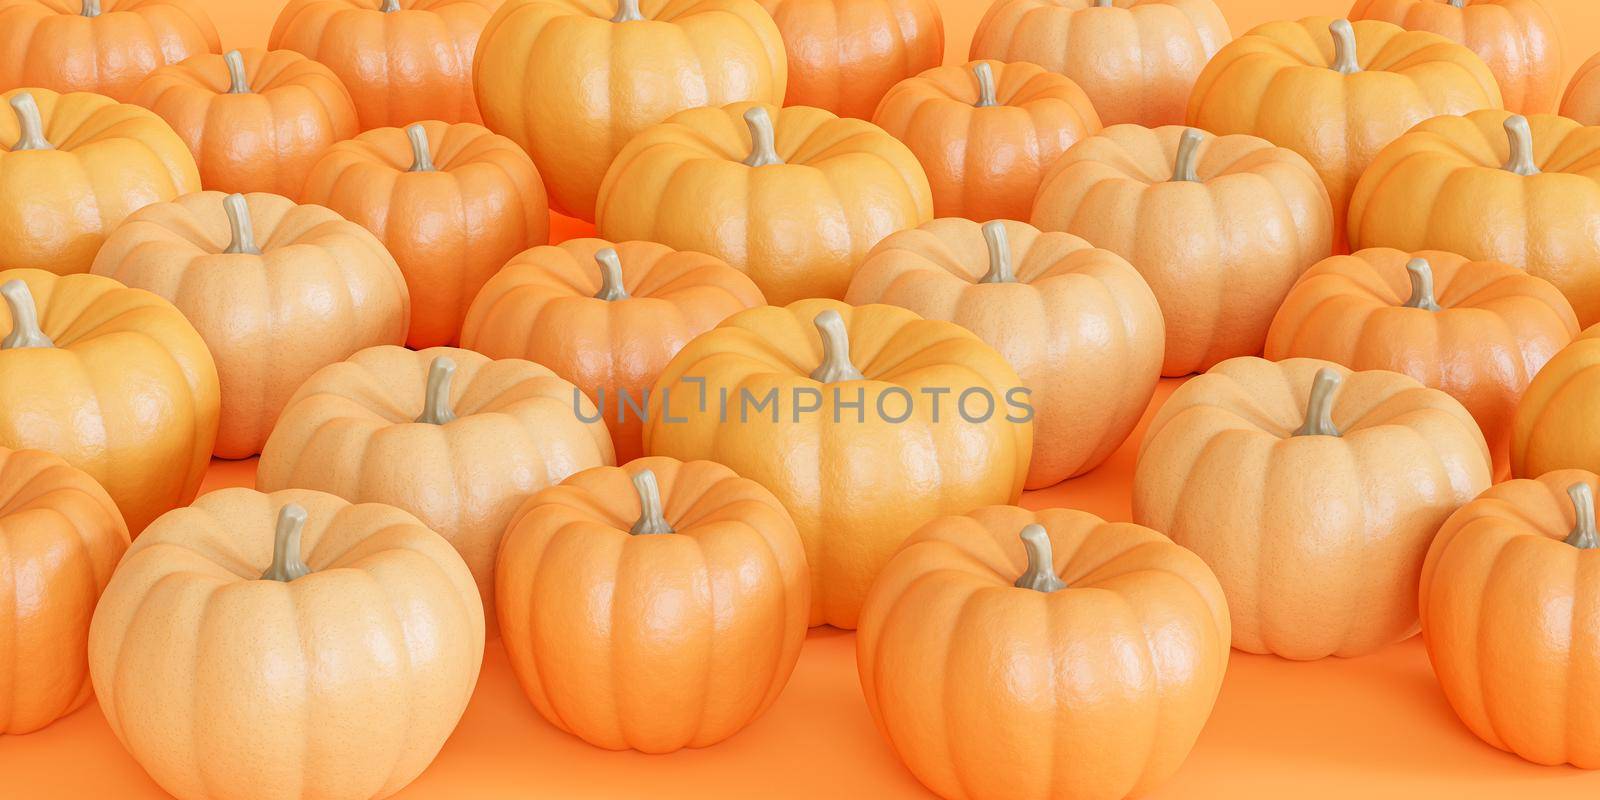 Pumpkins on orange background for autumn holidays or sales, 3d render by Frostroomhead